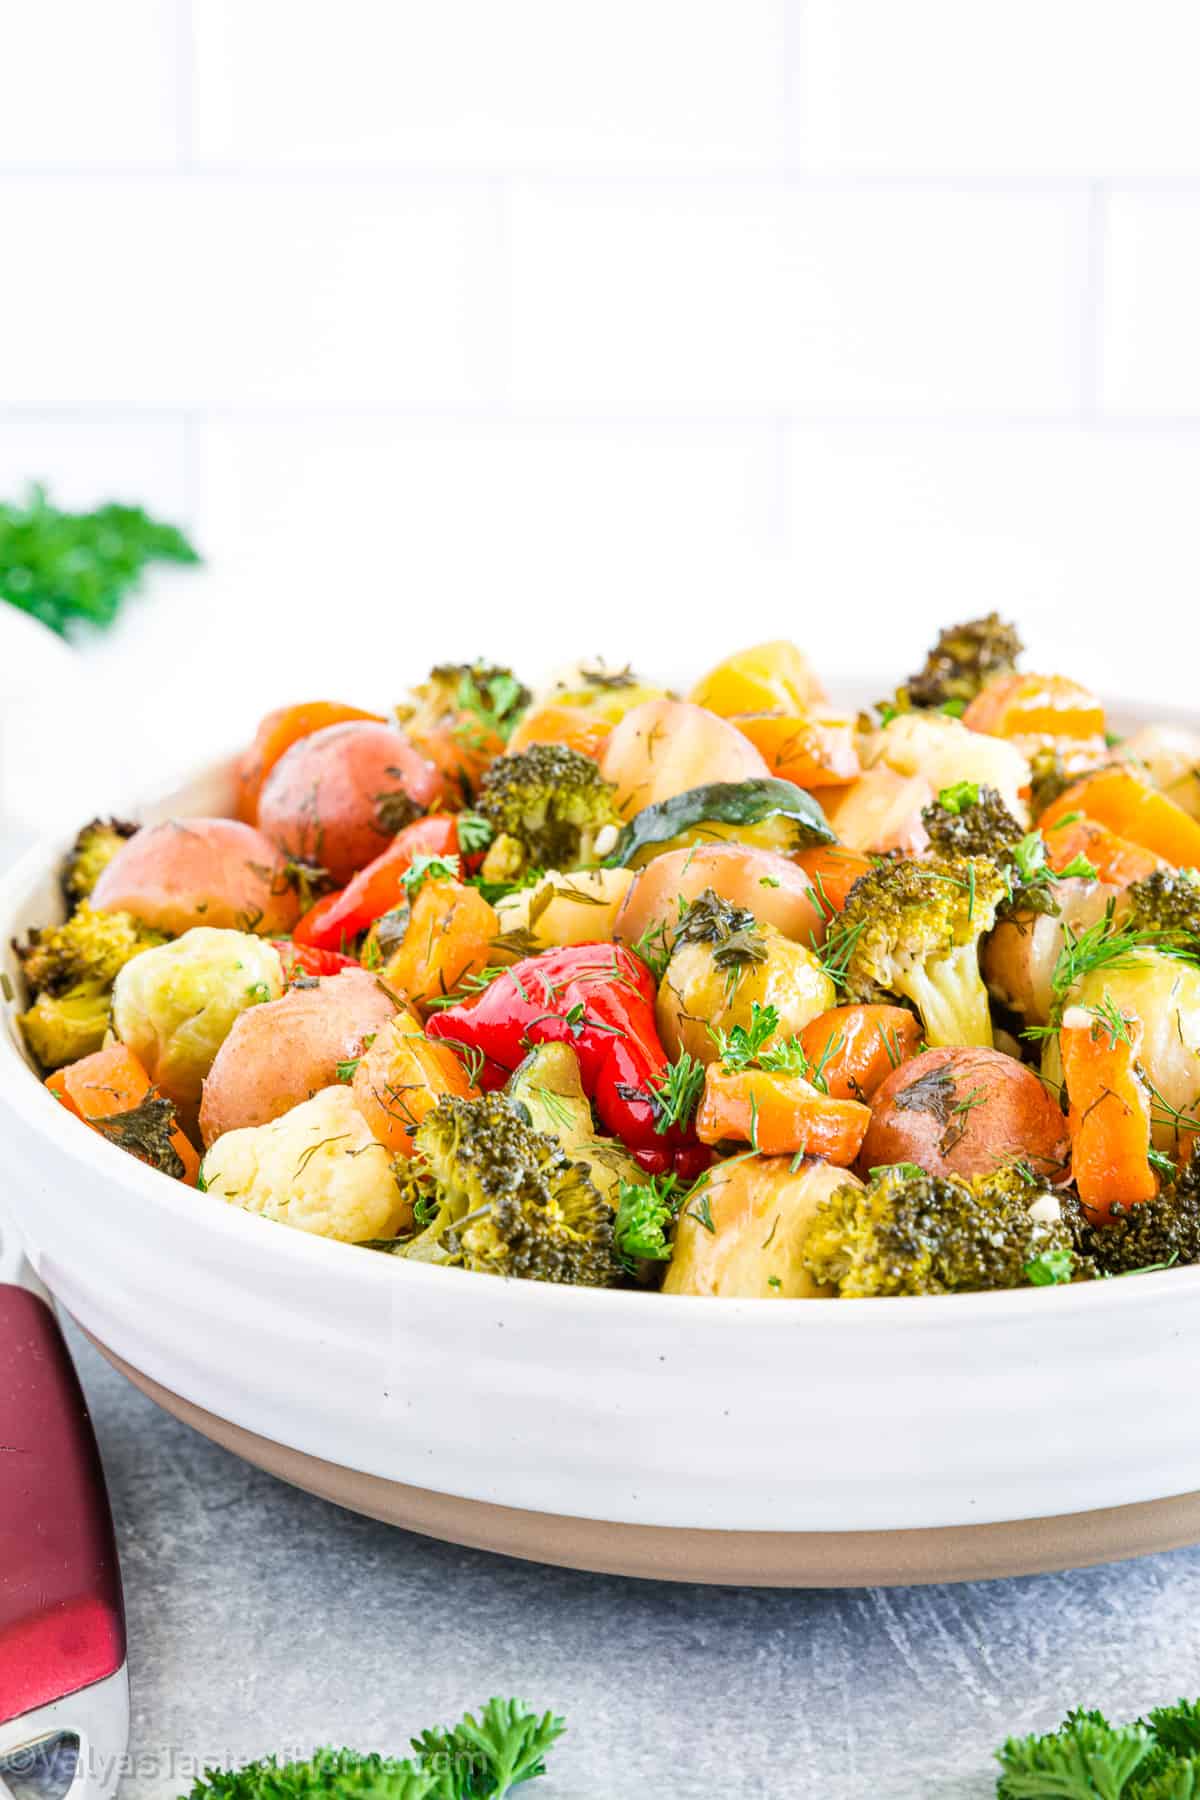 This simple Mixed Vegetables recipe is incredibly healthy and nutritious. It's super easy to make, and you can just throw all the ingredients together and bake!